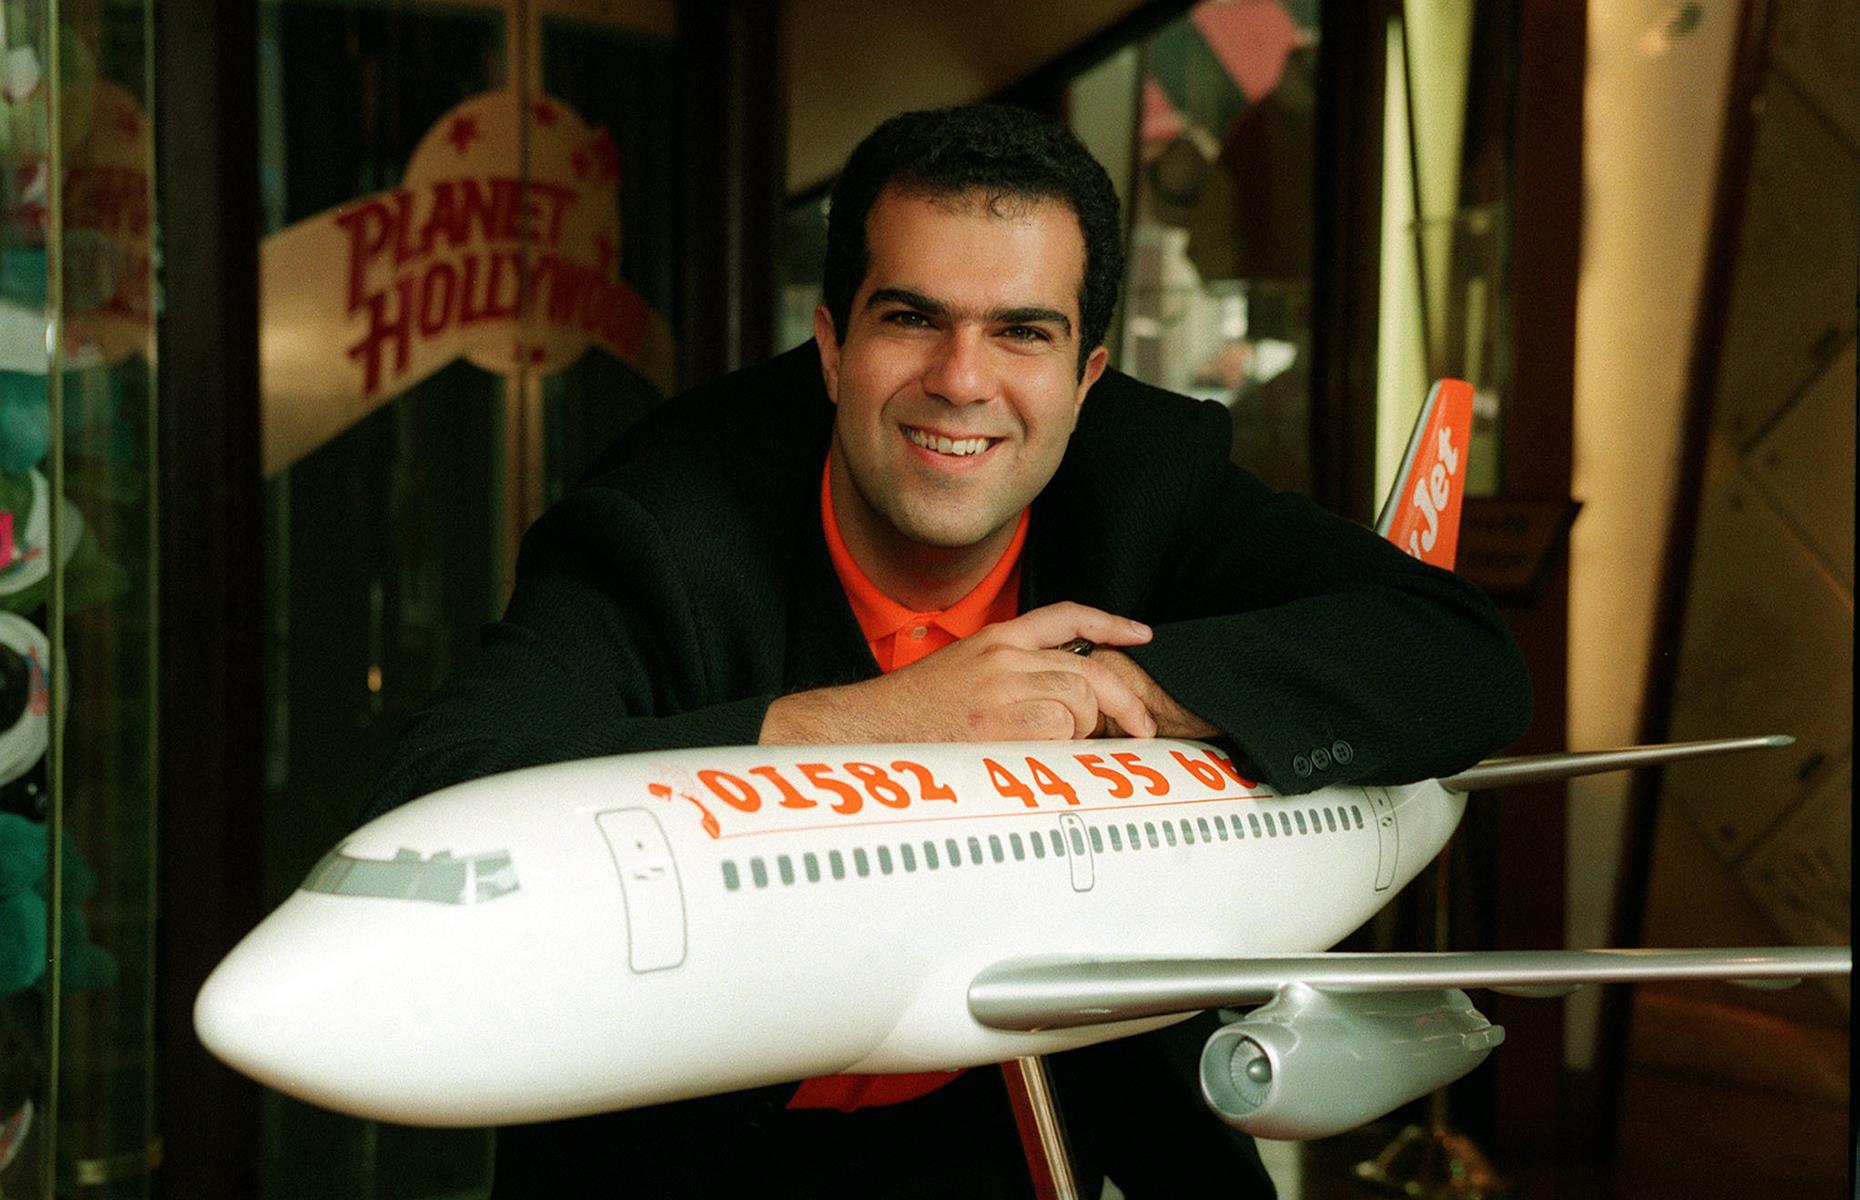 The budget-airline boom continued right into the 1990s, when easyJet was launched in 1995. At first, it flew only from London Luton Airport to Scottish destinations Edinburgh and Glasgow, before expanding across Europe. By this decade, these low-cost carriers meant air travel was no longer necessarily seen as a luxury.